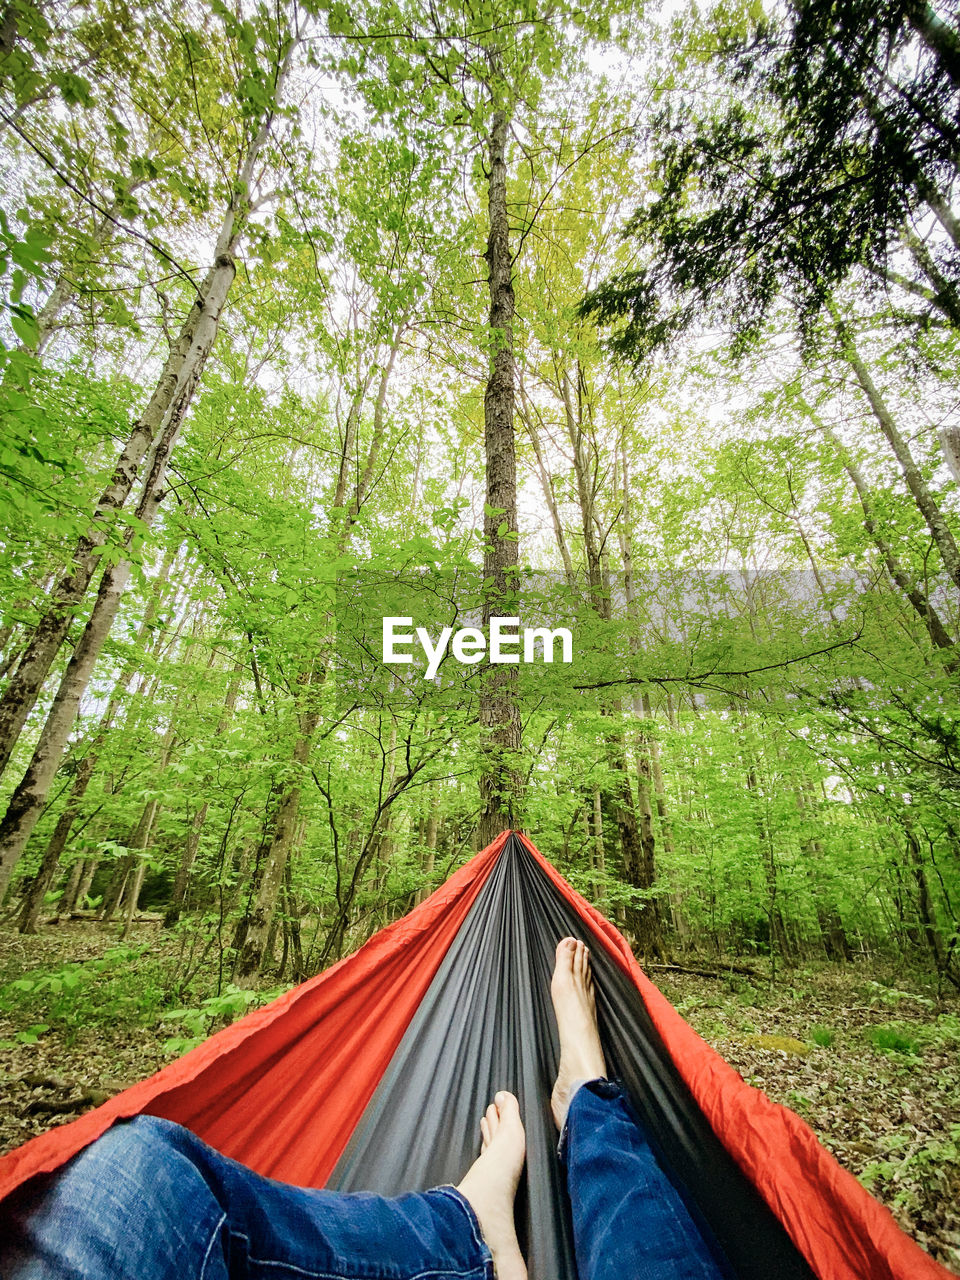 Pov of feet in hammock in a forest surrounded by trees while camping